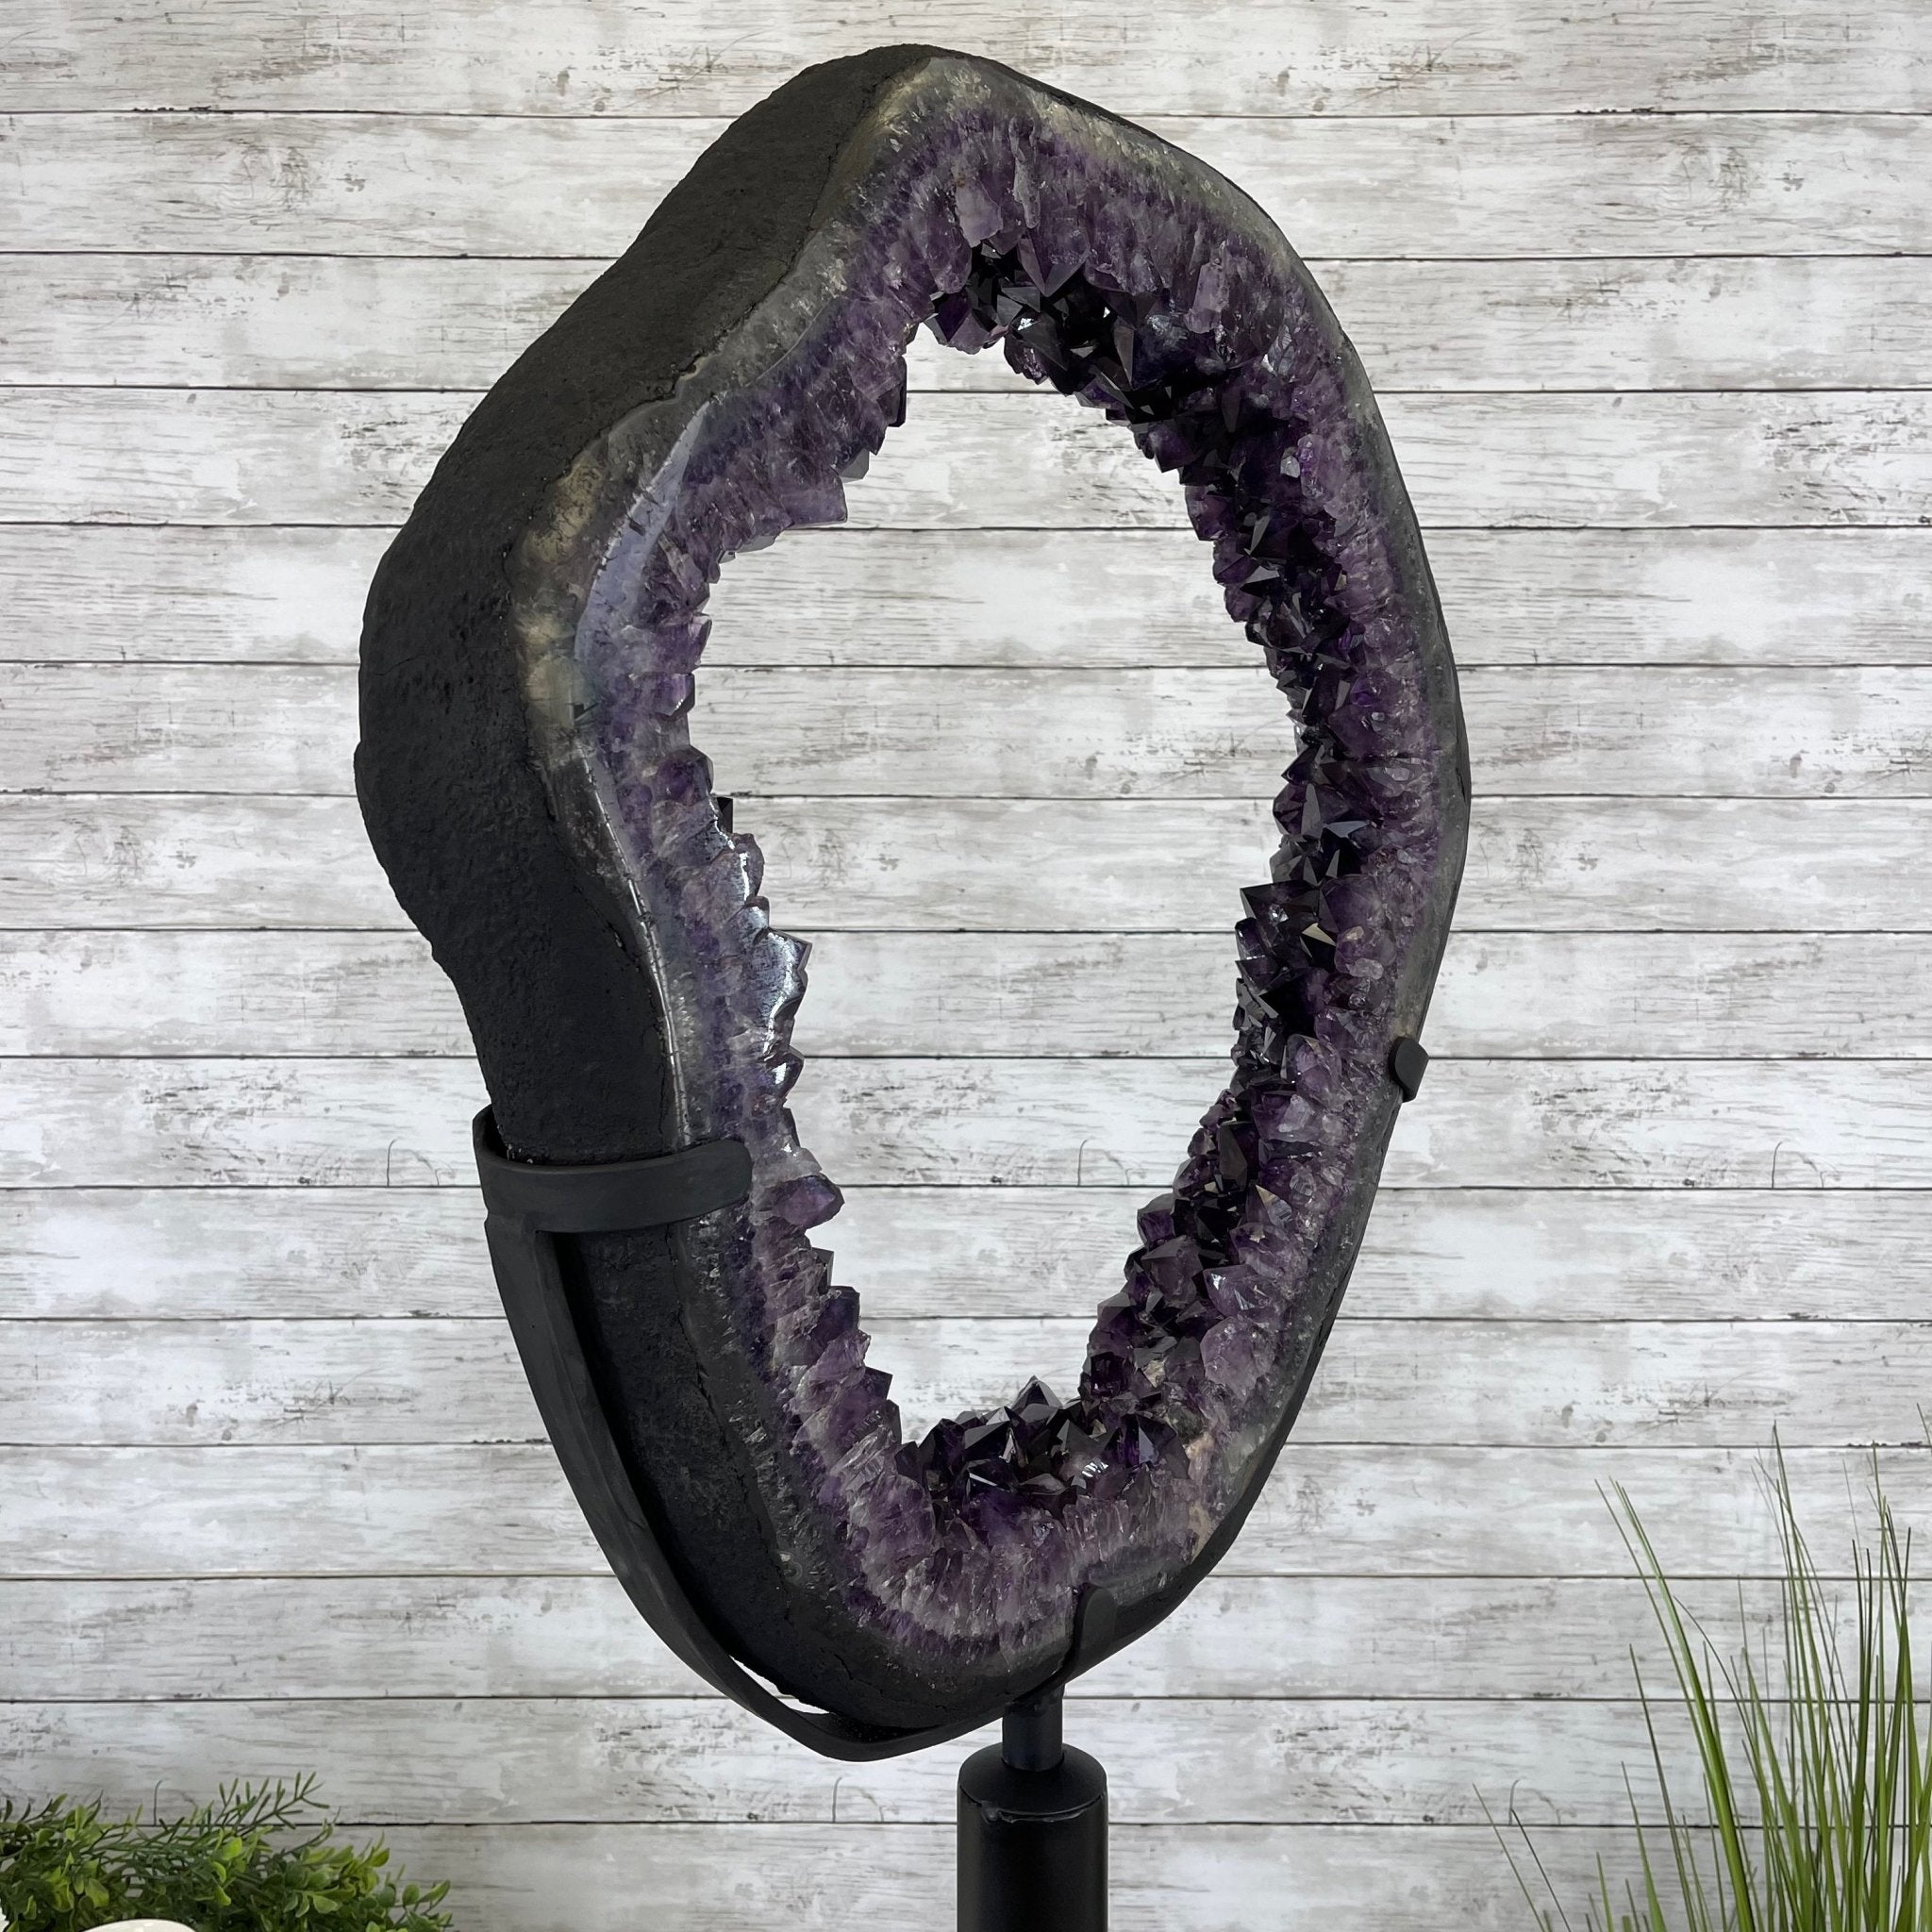 Super Quality Brazilian Amethyst Crystal Portal on a Tall Rotating Stand, 97 lbs & 71" tall Model #5604-0097 by Brazil Gems - Brazil GemsBrazil GemsSuper Quality Brazilian Amethyst Crystal Portal on a Tall Rotating Stand, 97 lbs & 71" tall Model #5604-0097 by Brazil GemsPortals on Rotating Bases5604-0097